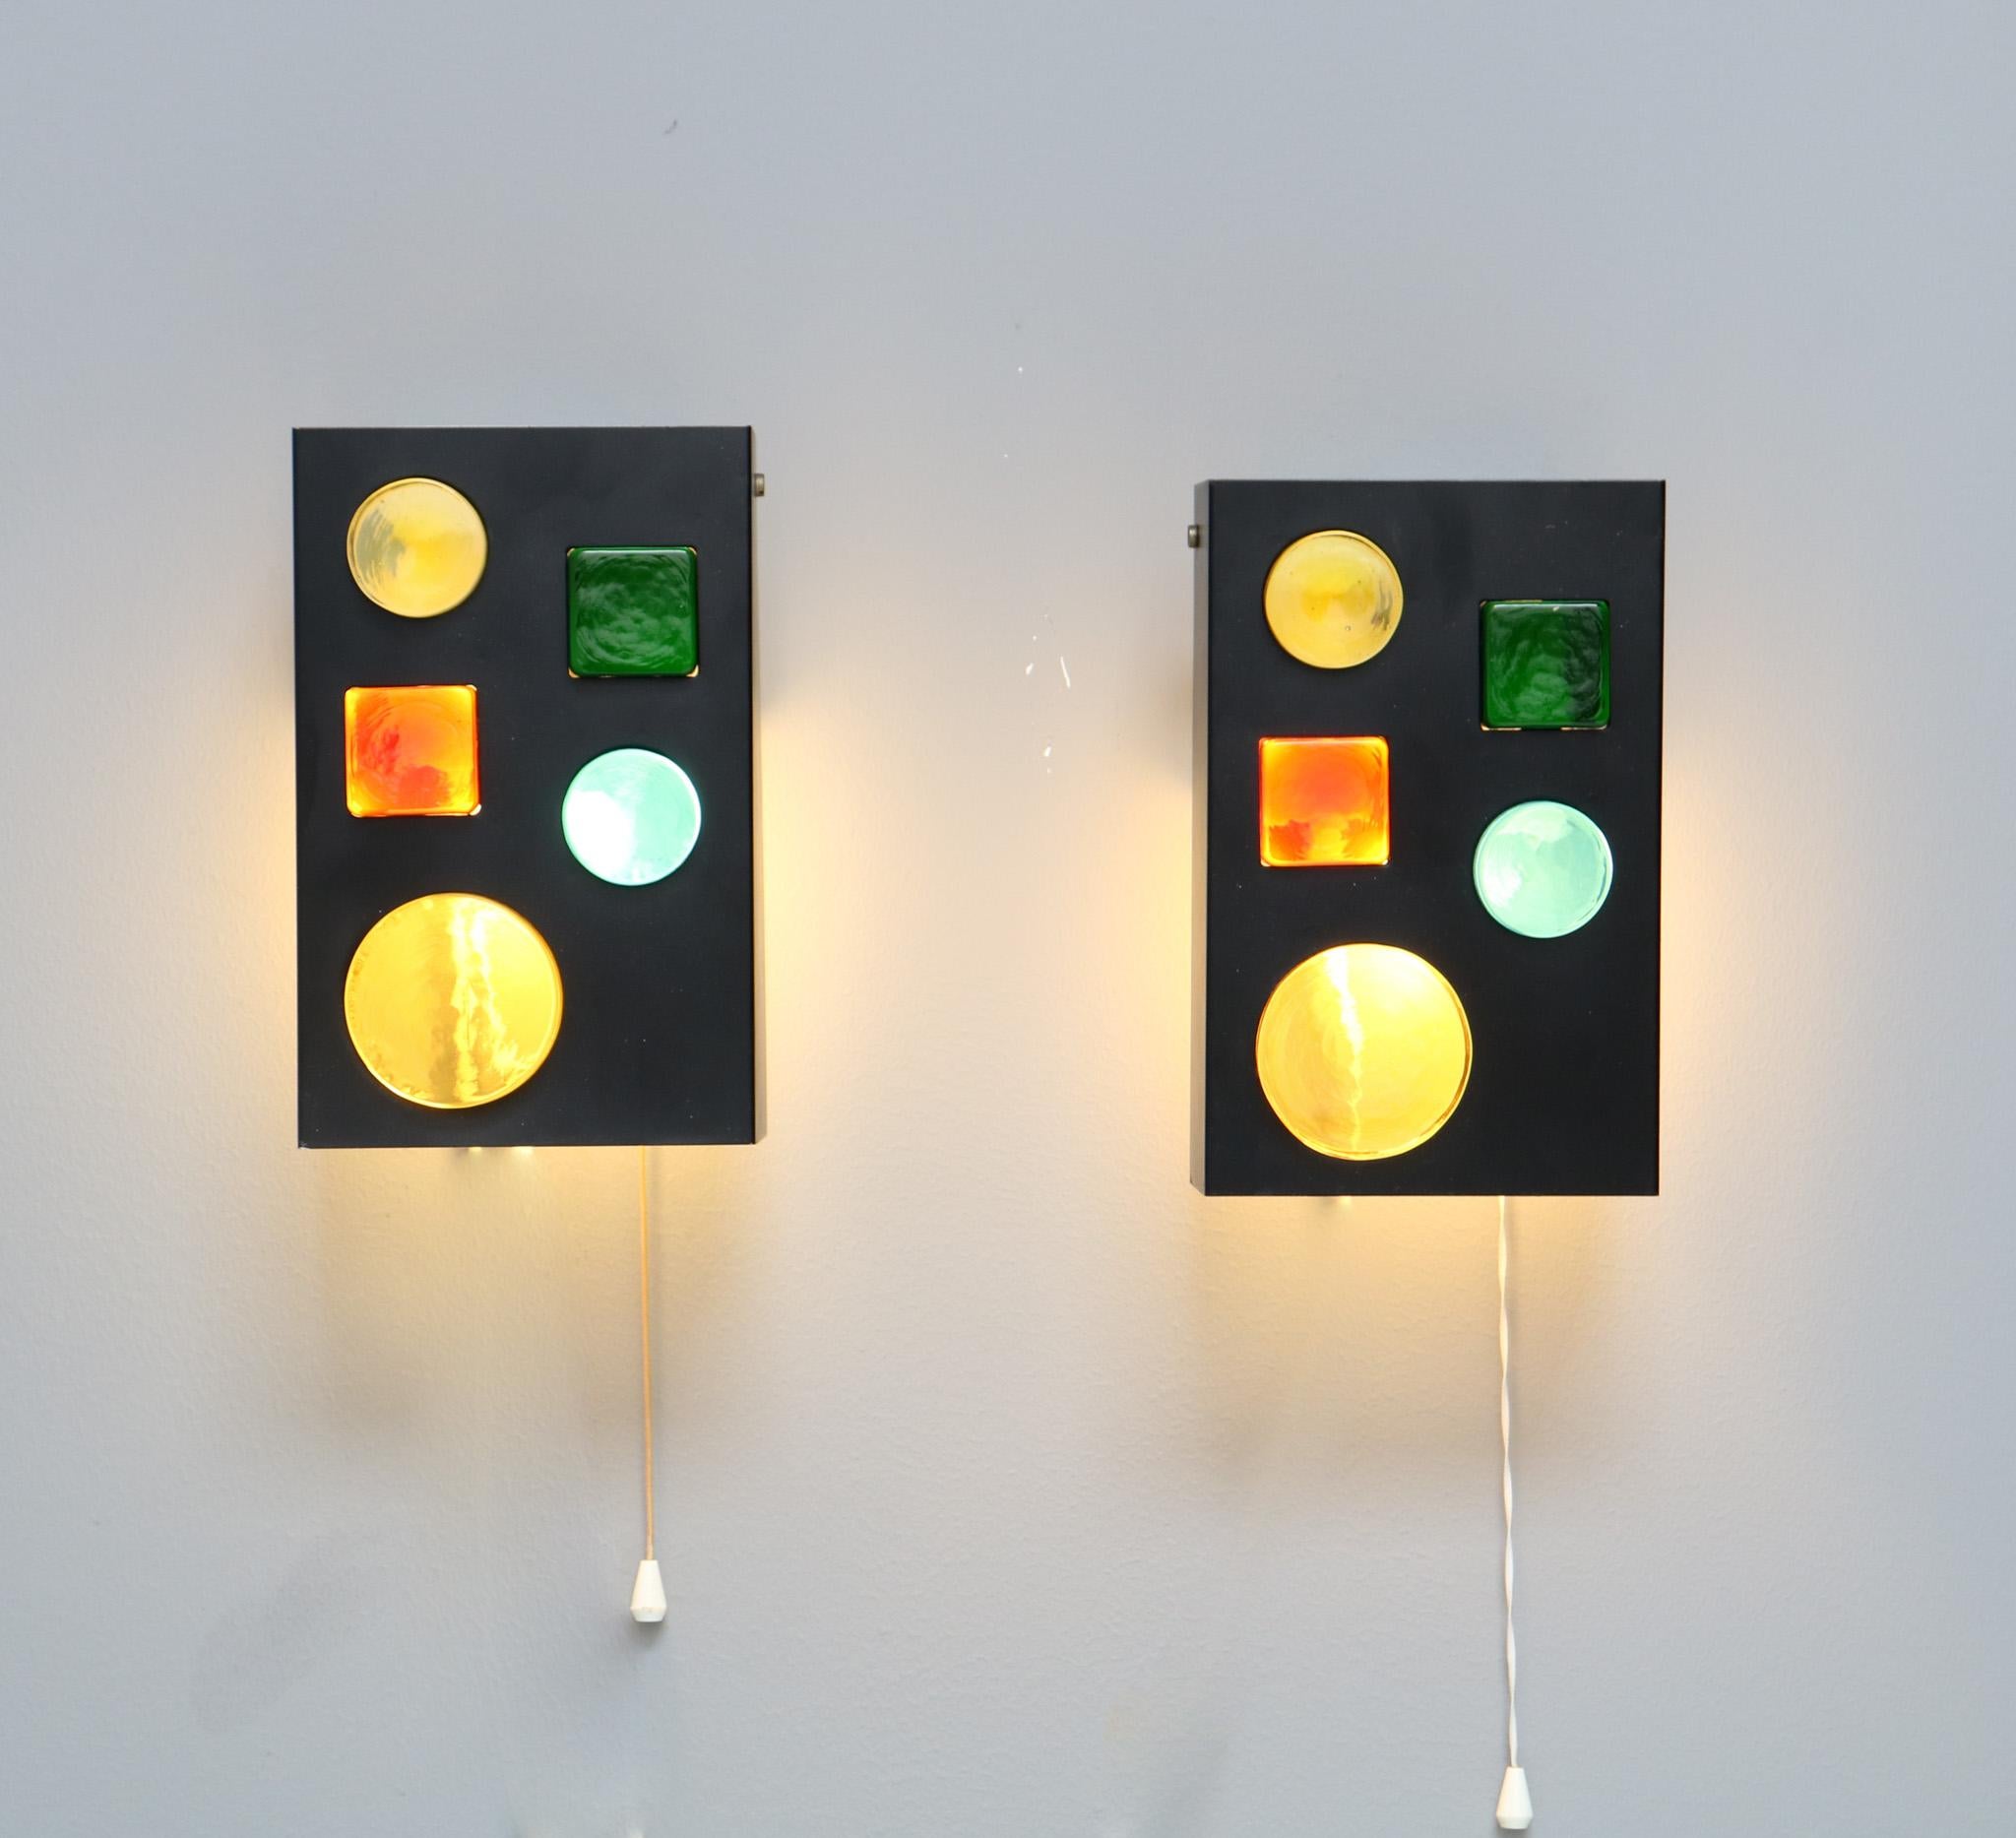 Stunning and rare pair of Mid-Century Modern wall lights objects.
Design by Raak Amsterdam.
Model: Alchemy 1968.
Striking Dutch design from the 1960s.
Original black lacquered metal frames with original multi-colored Murano glass.
With original pull